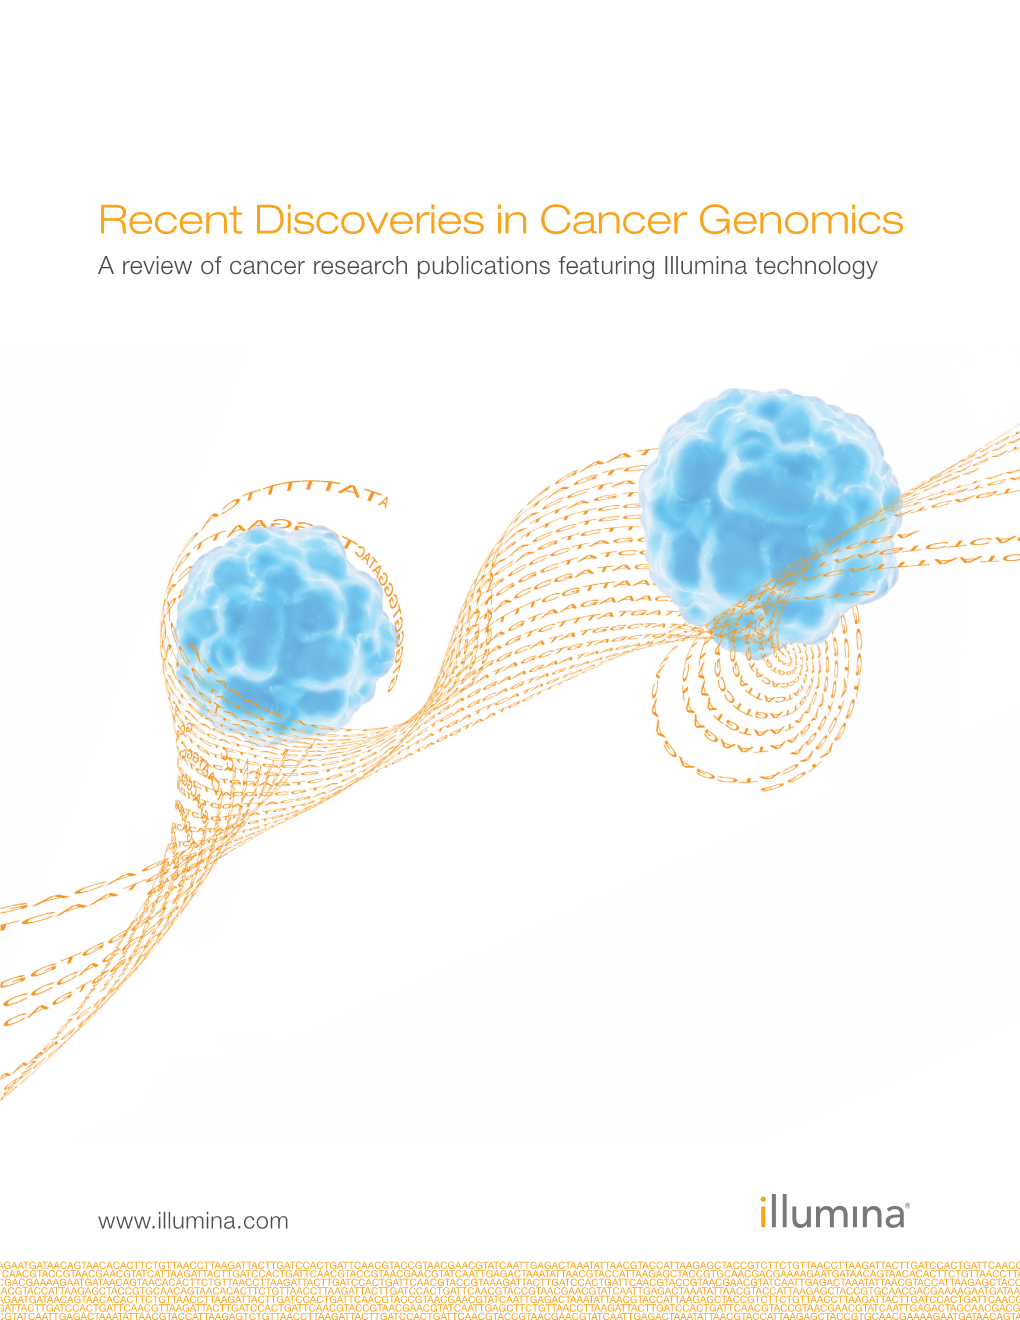 Recent Discoveries in Cancer Genomics a Review of Cancer Research Publications Featuring Illumina Technology